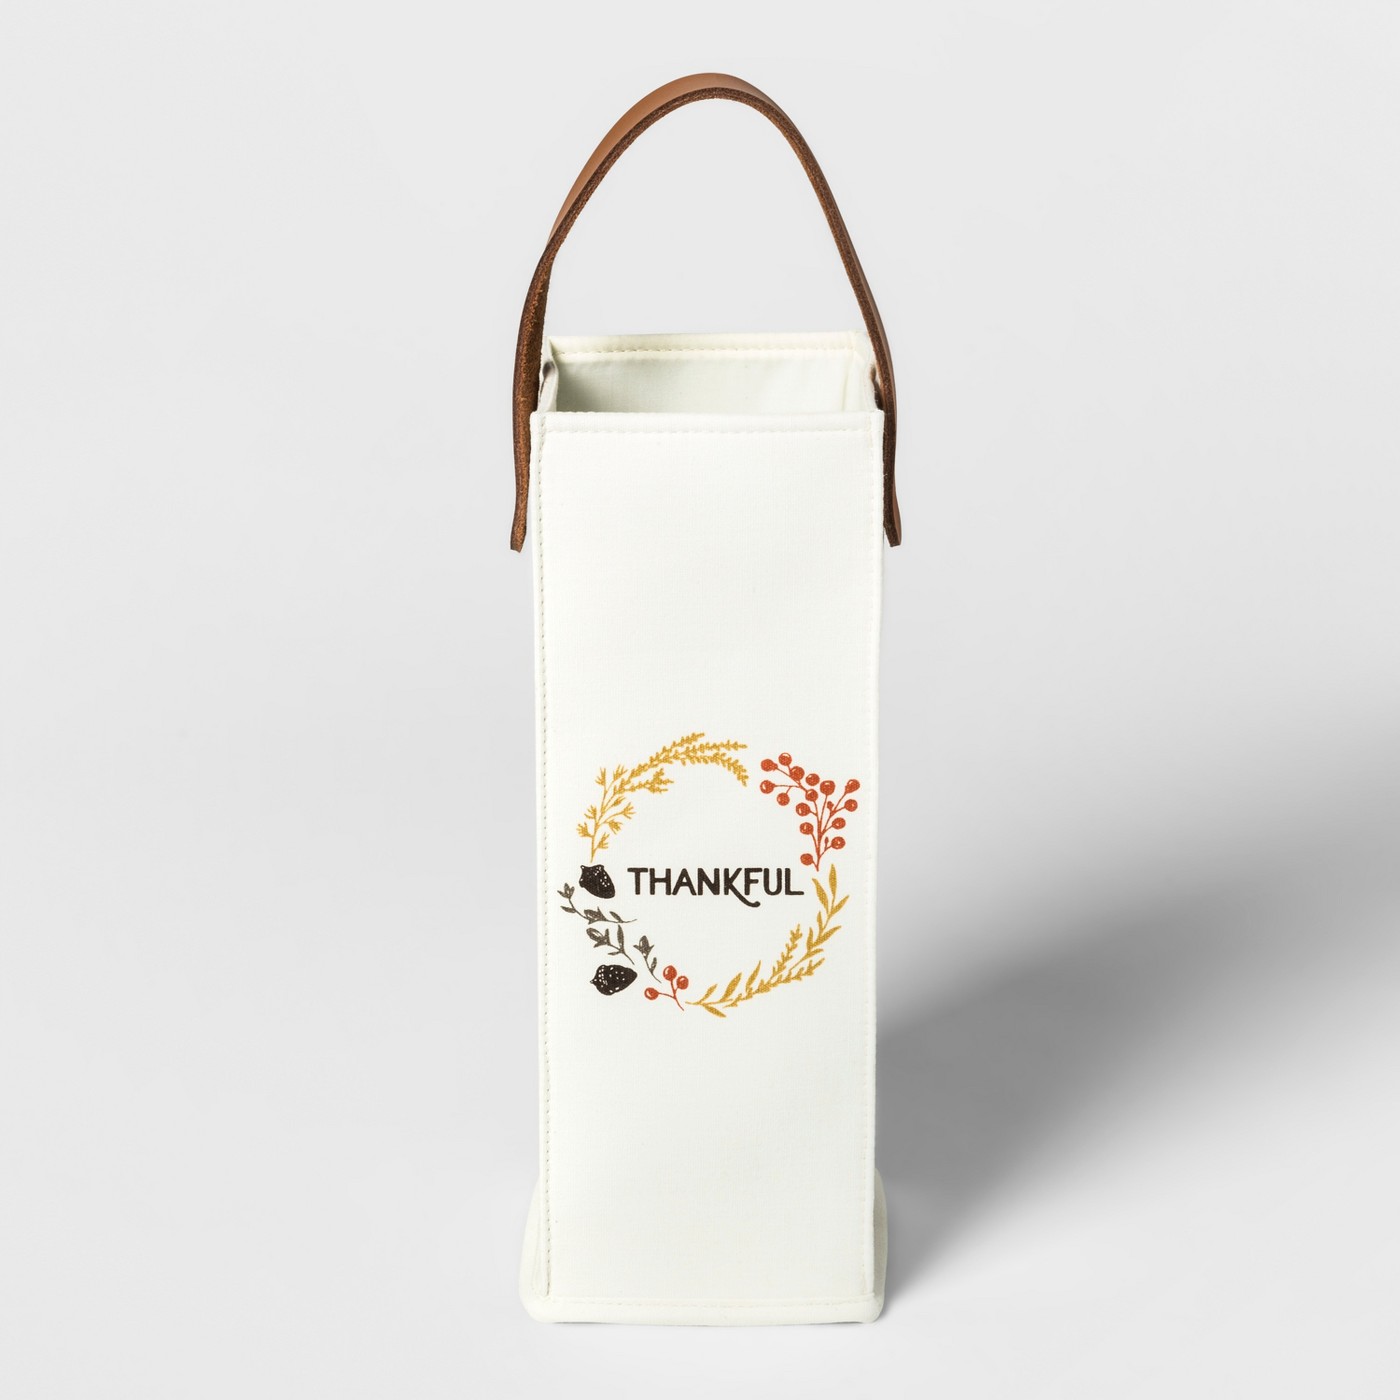 Thankful Canvas Wine Bag With Leather Handle White/Brown - Thresholdâ„¢ - image 1 of 1